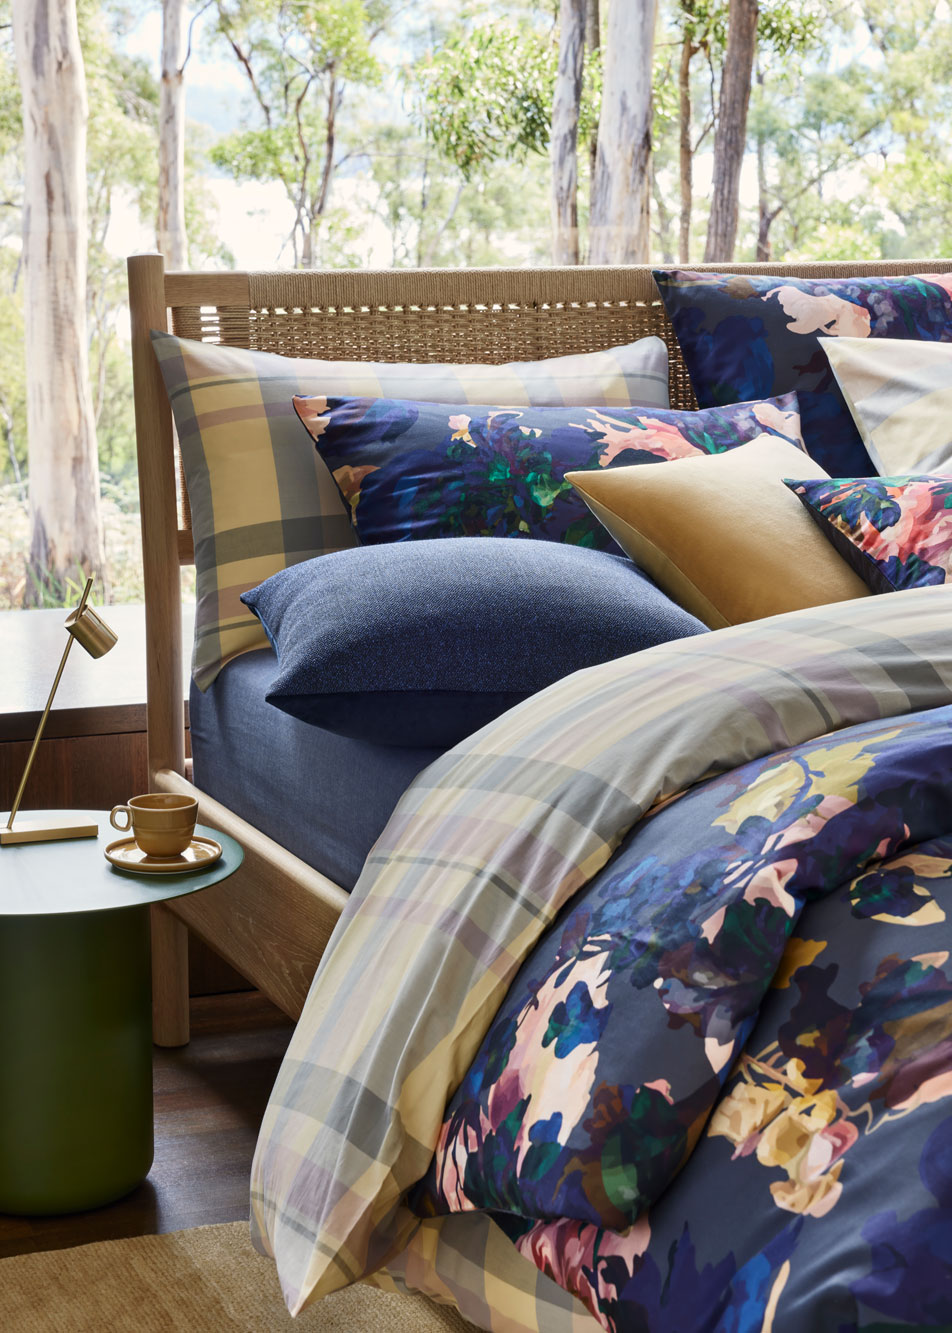 A bed sits in front of a window with a view of trees. The bed has layers of pillows and cushions, with two quilt covers in floral and check prints.